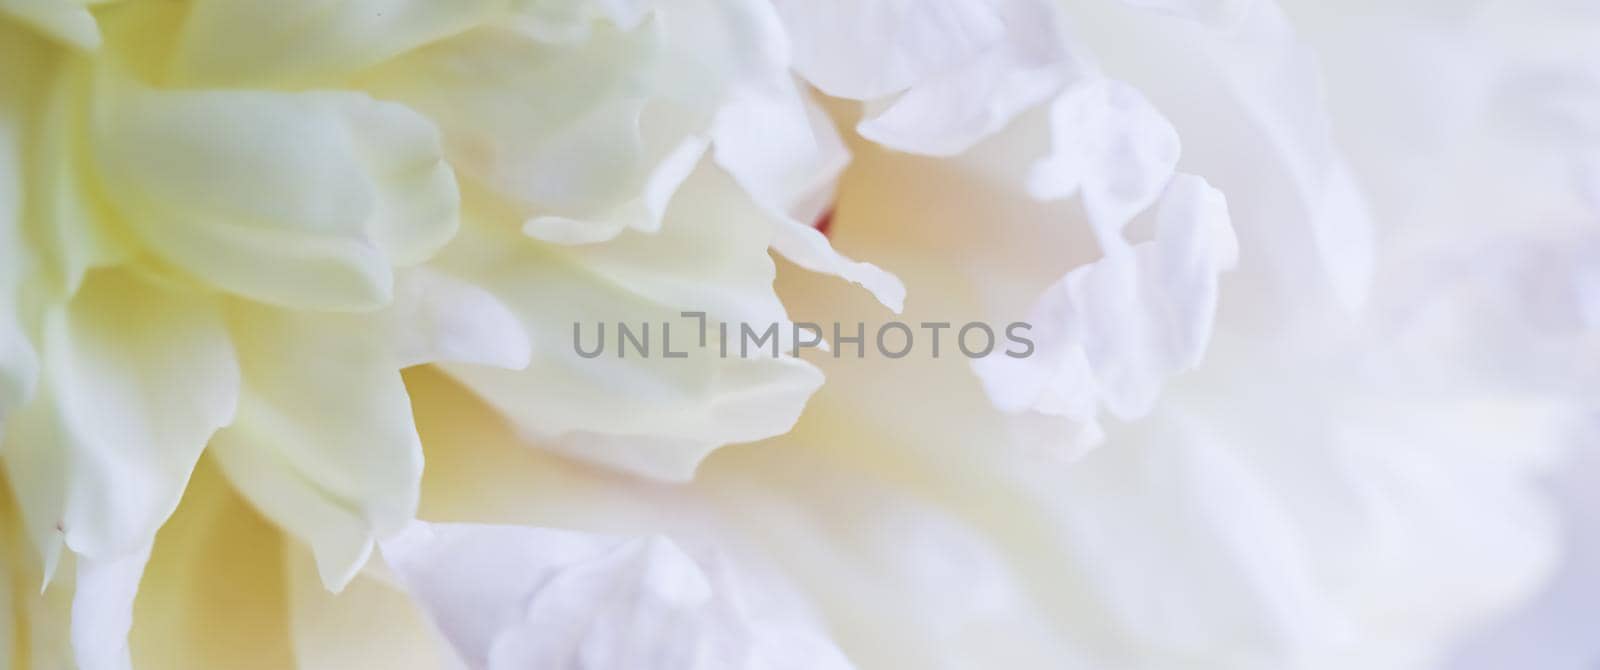 Botanical concept, invitation card - Soft focus, abstract floral background, white peony flower petals. Macro flowers backdrop for holiday brand design